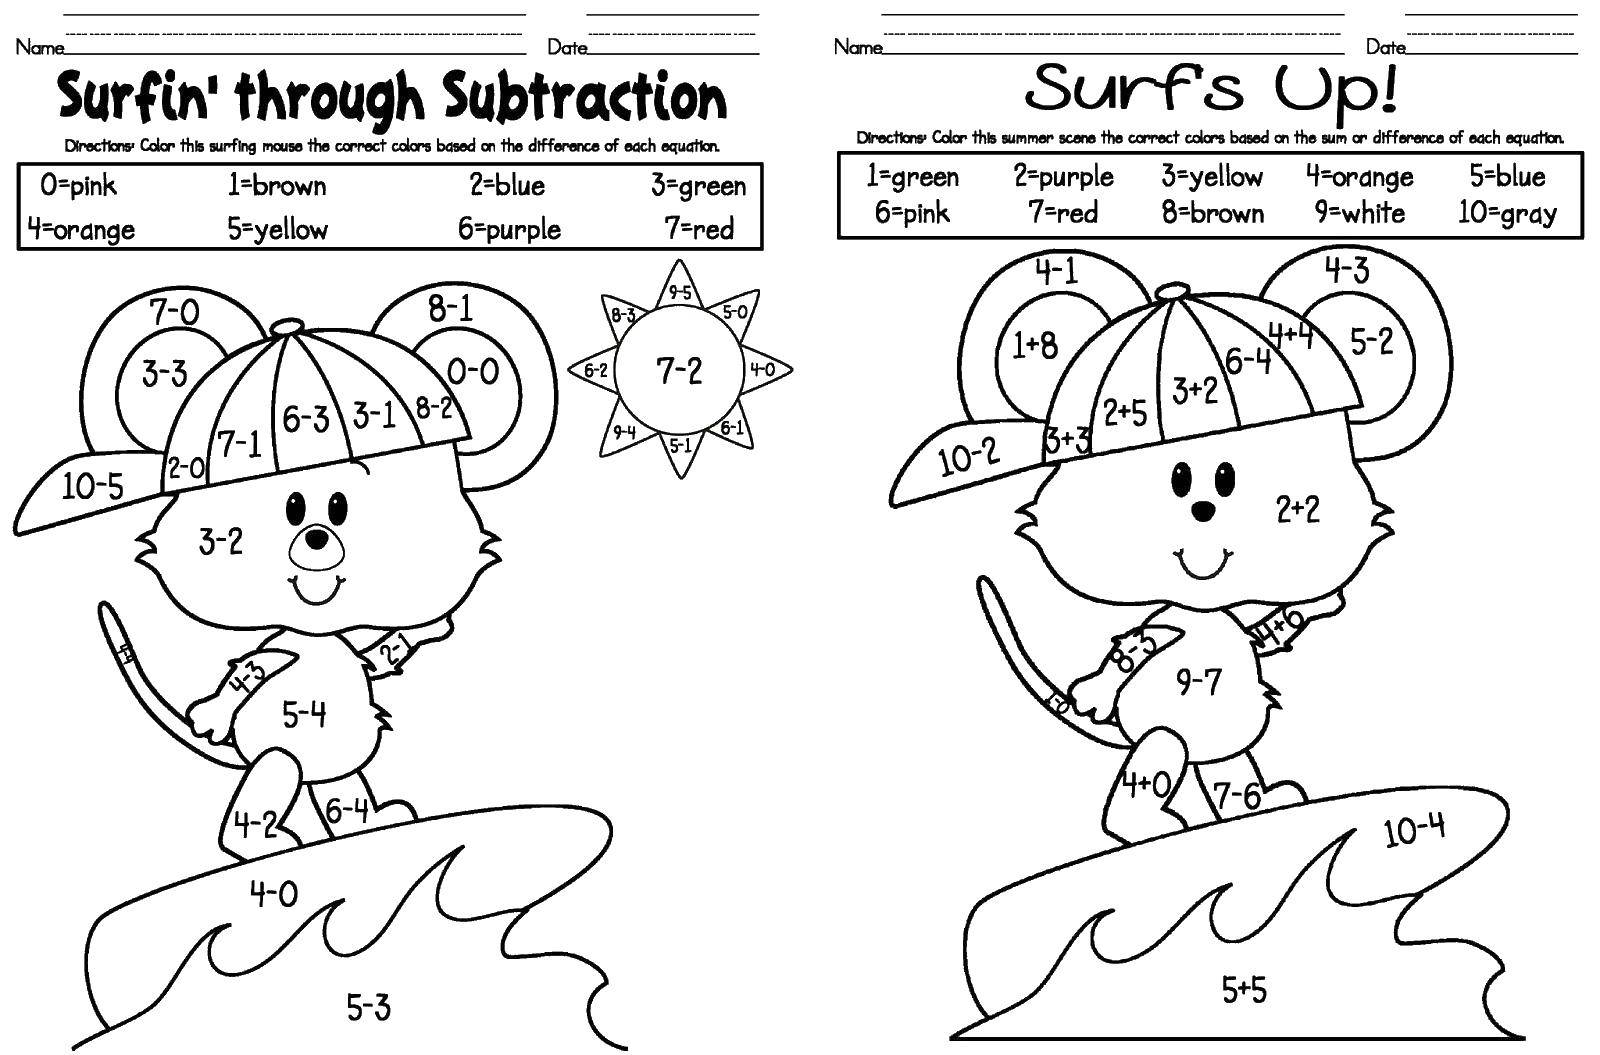 Coloring Mouse surfer. Category mathematical coloring pages. Tags:  mouse, surfer.